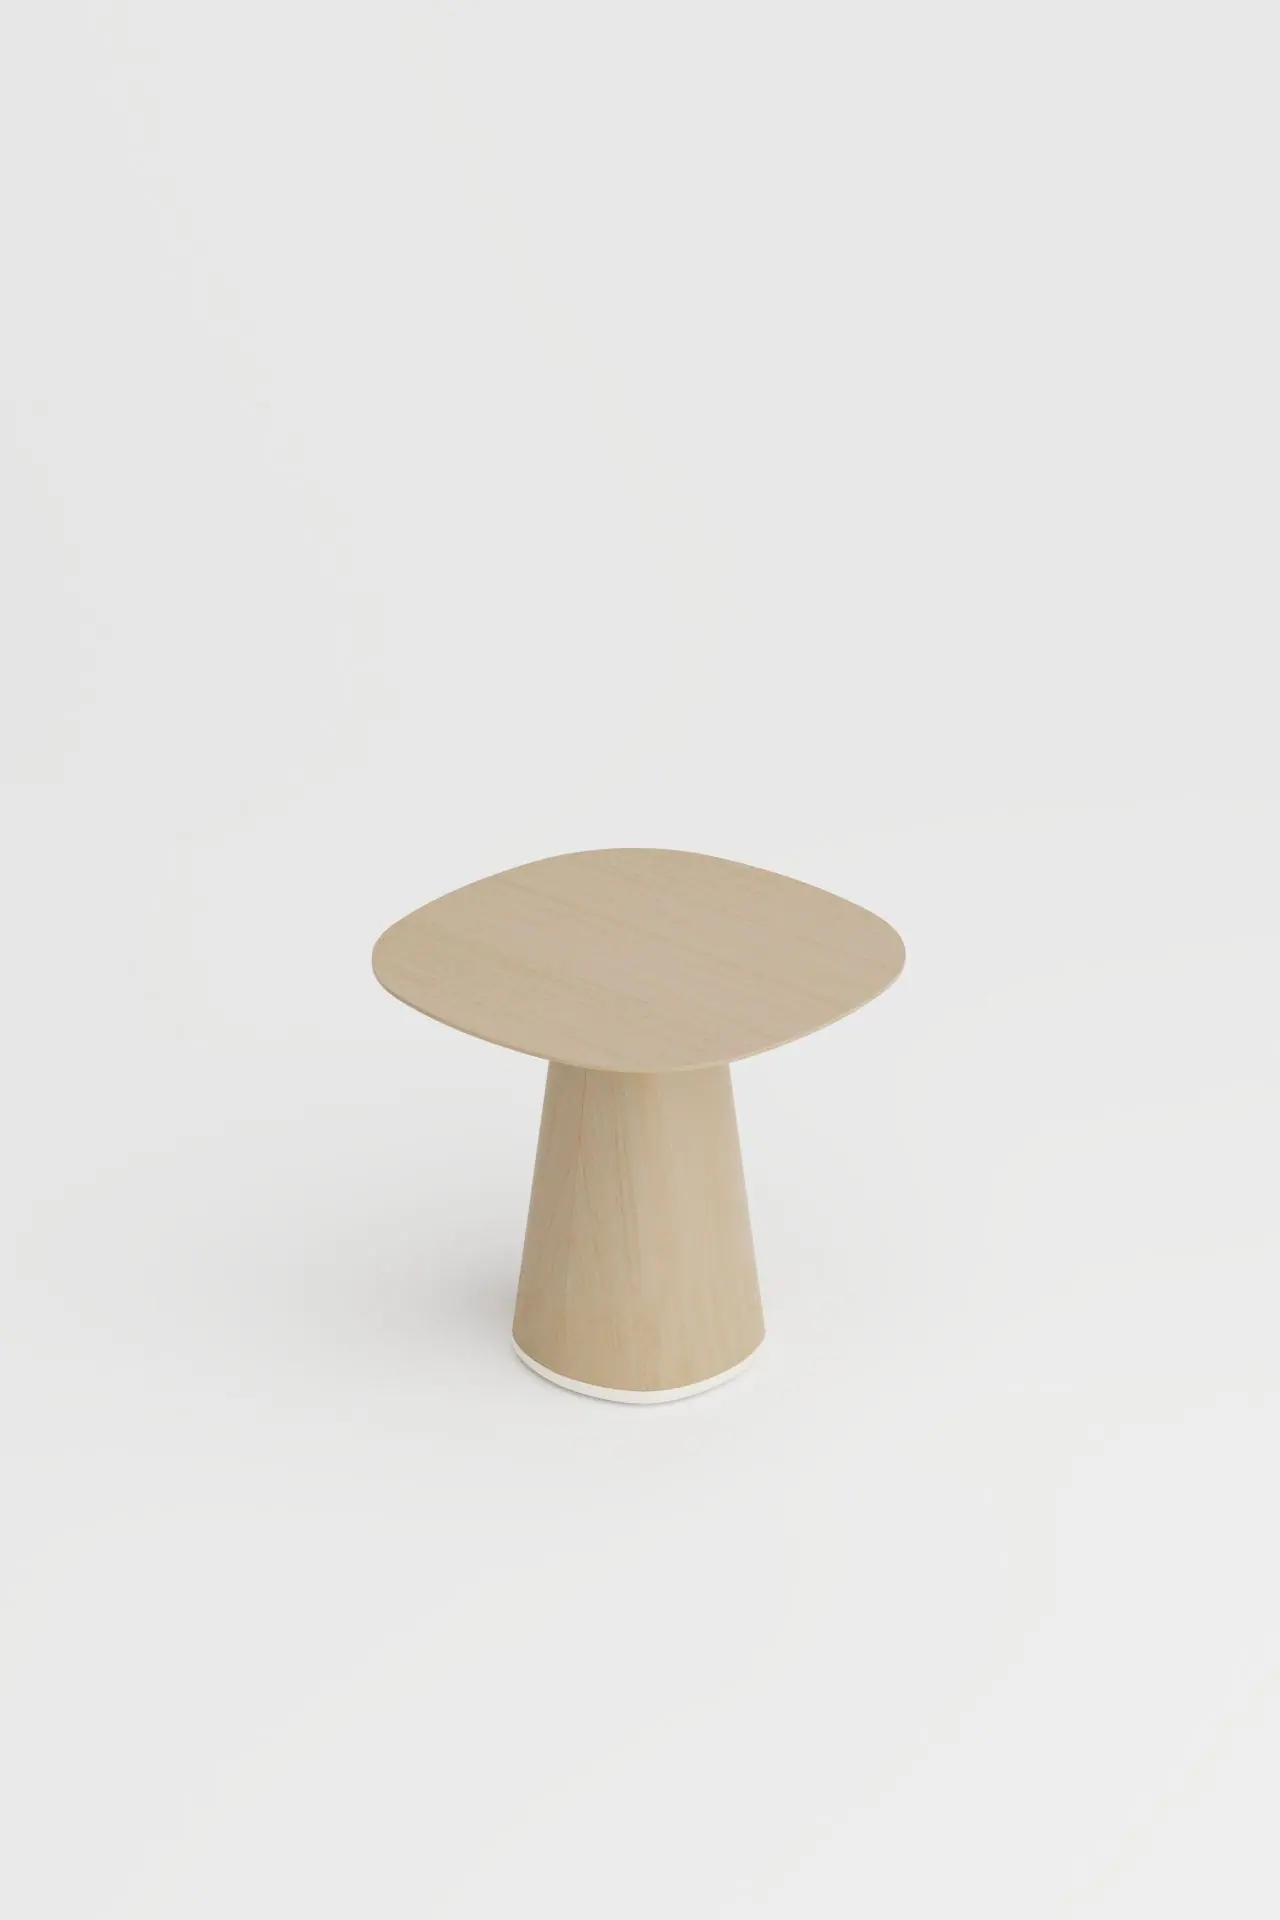 conic_table_verges_10